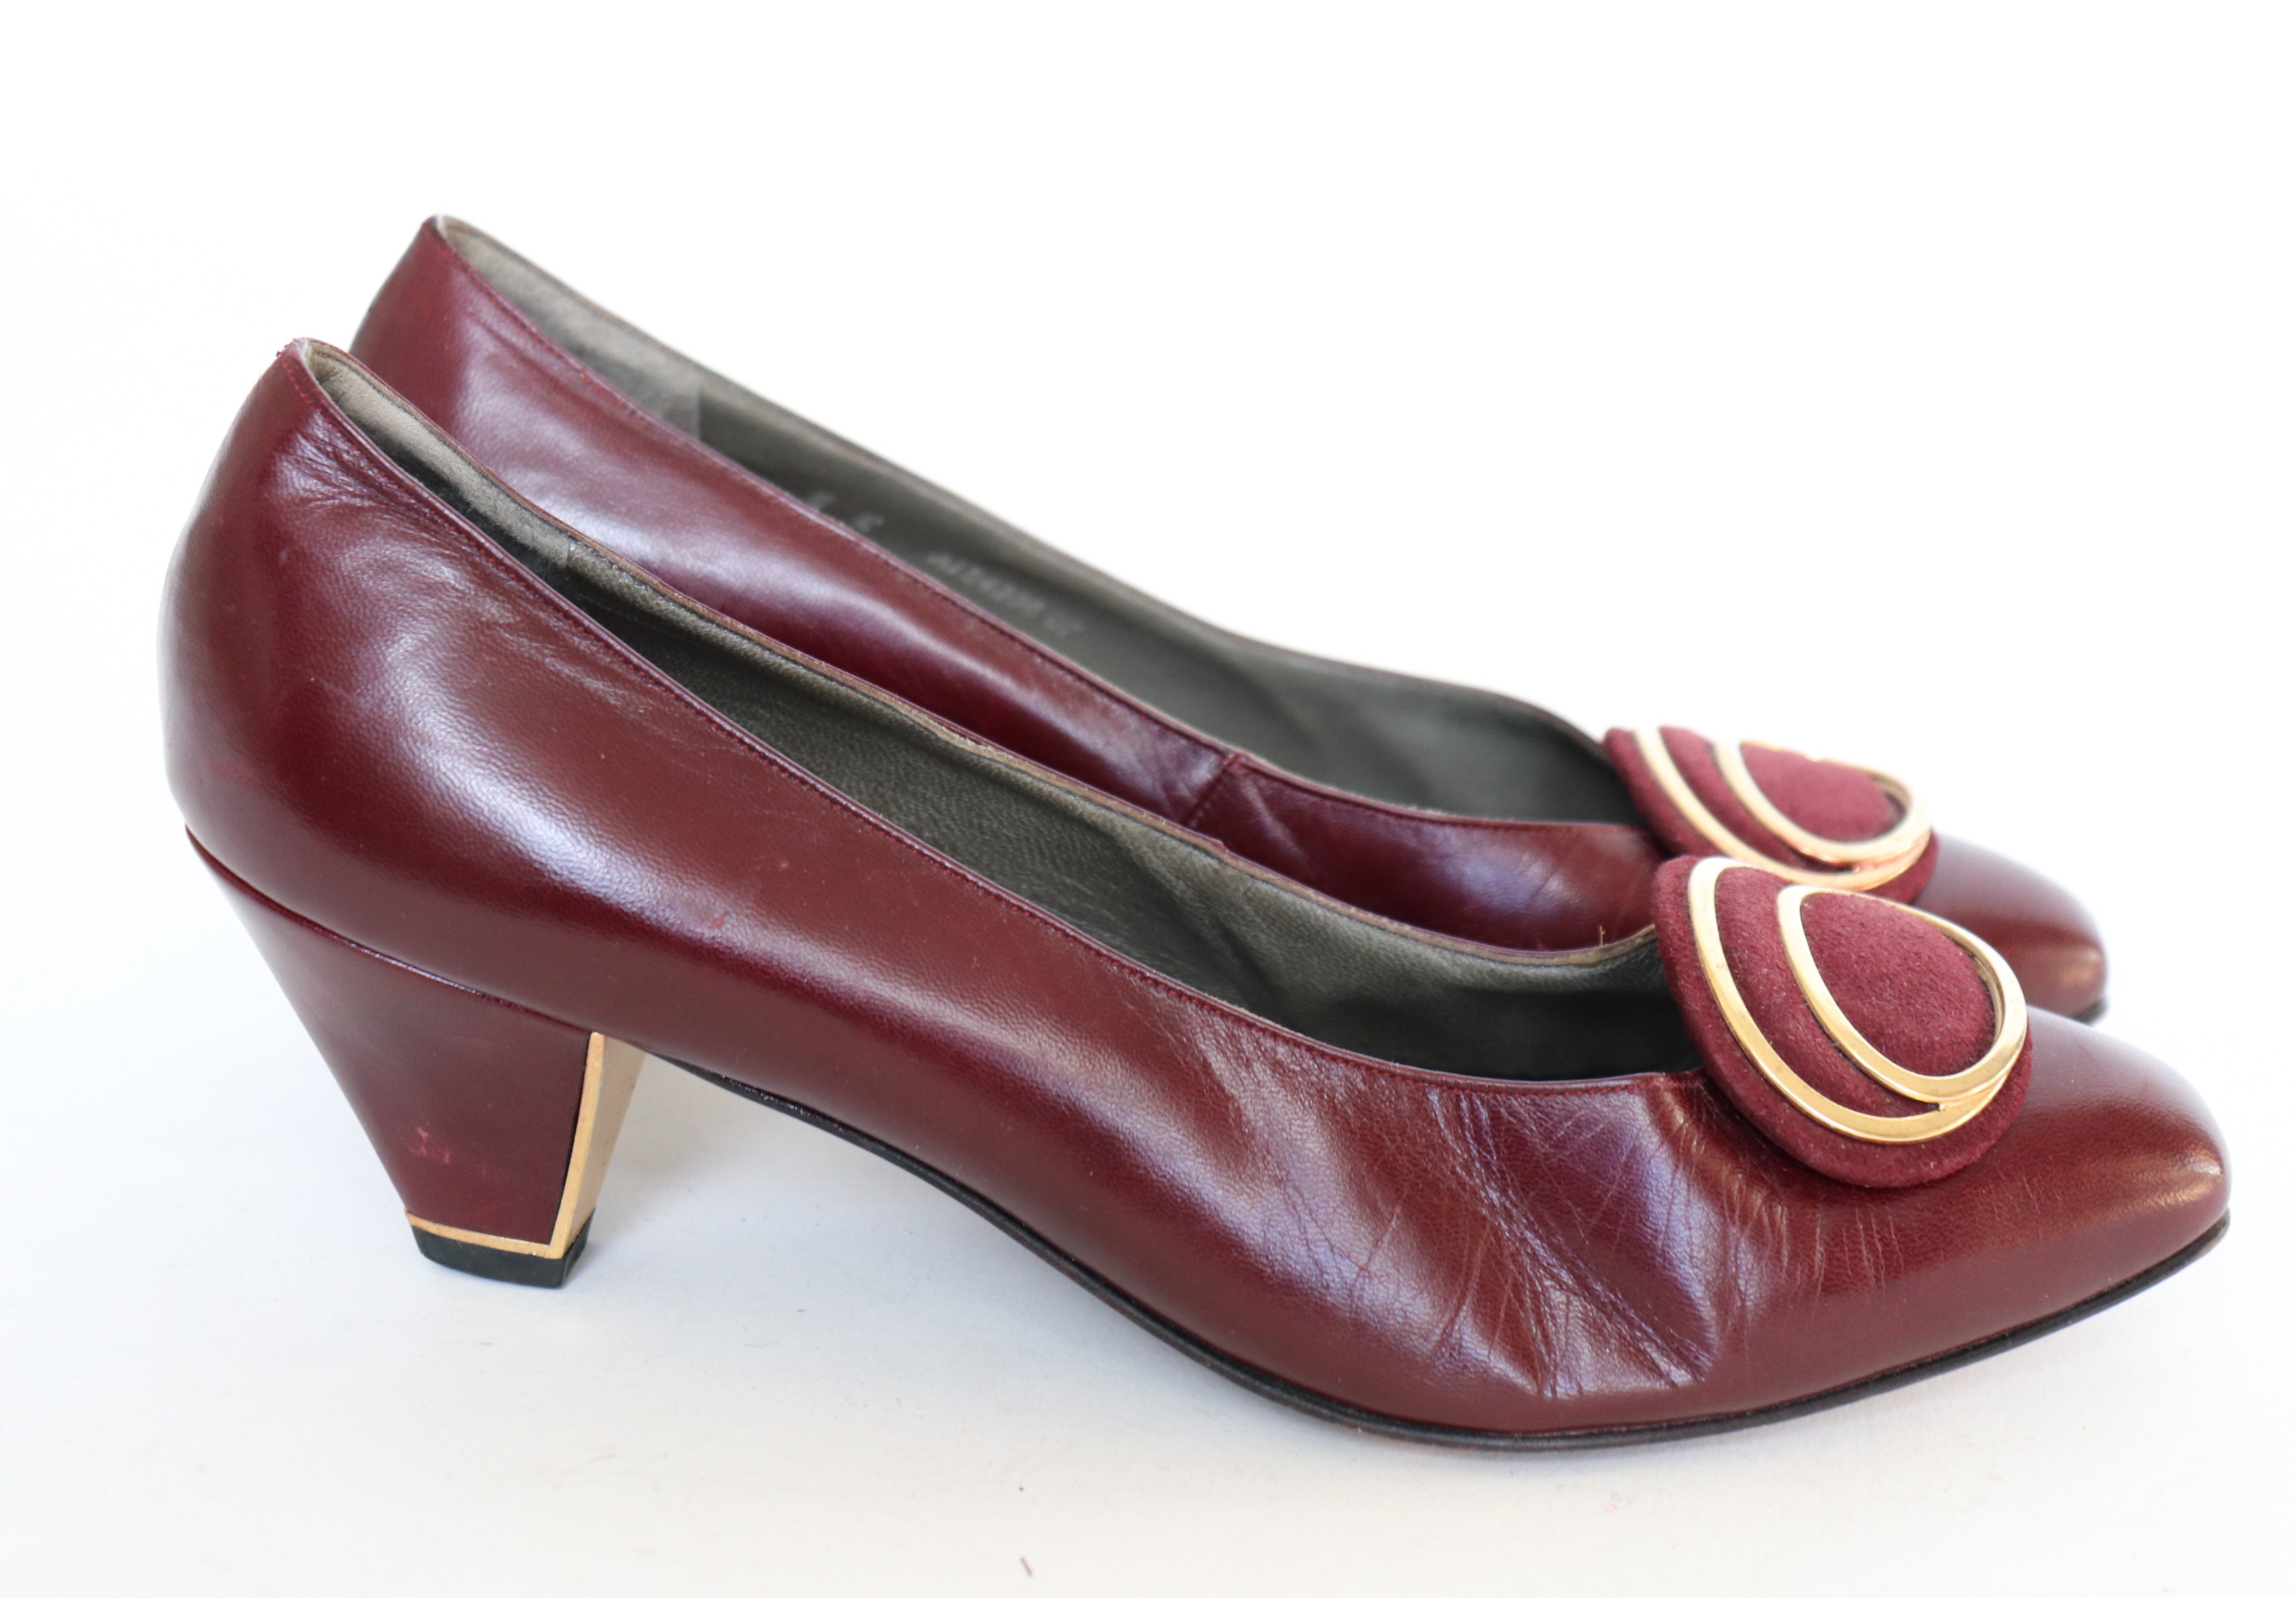 Bally Suisse Leather Shoes - Burgundy Heel Pumps - Label 5 E - Fit 37.5 / 4.5